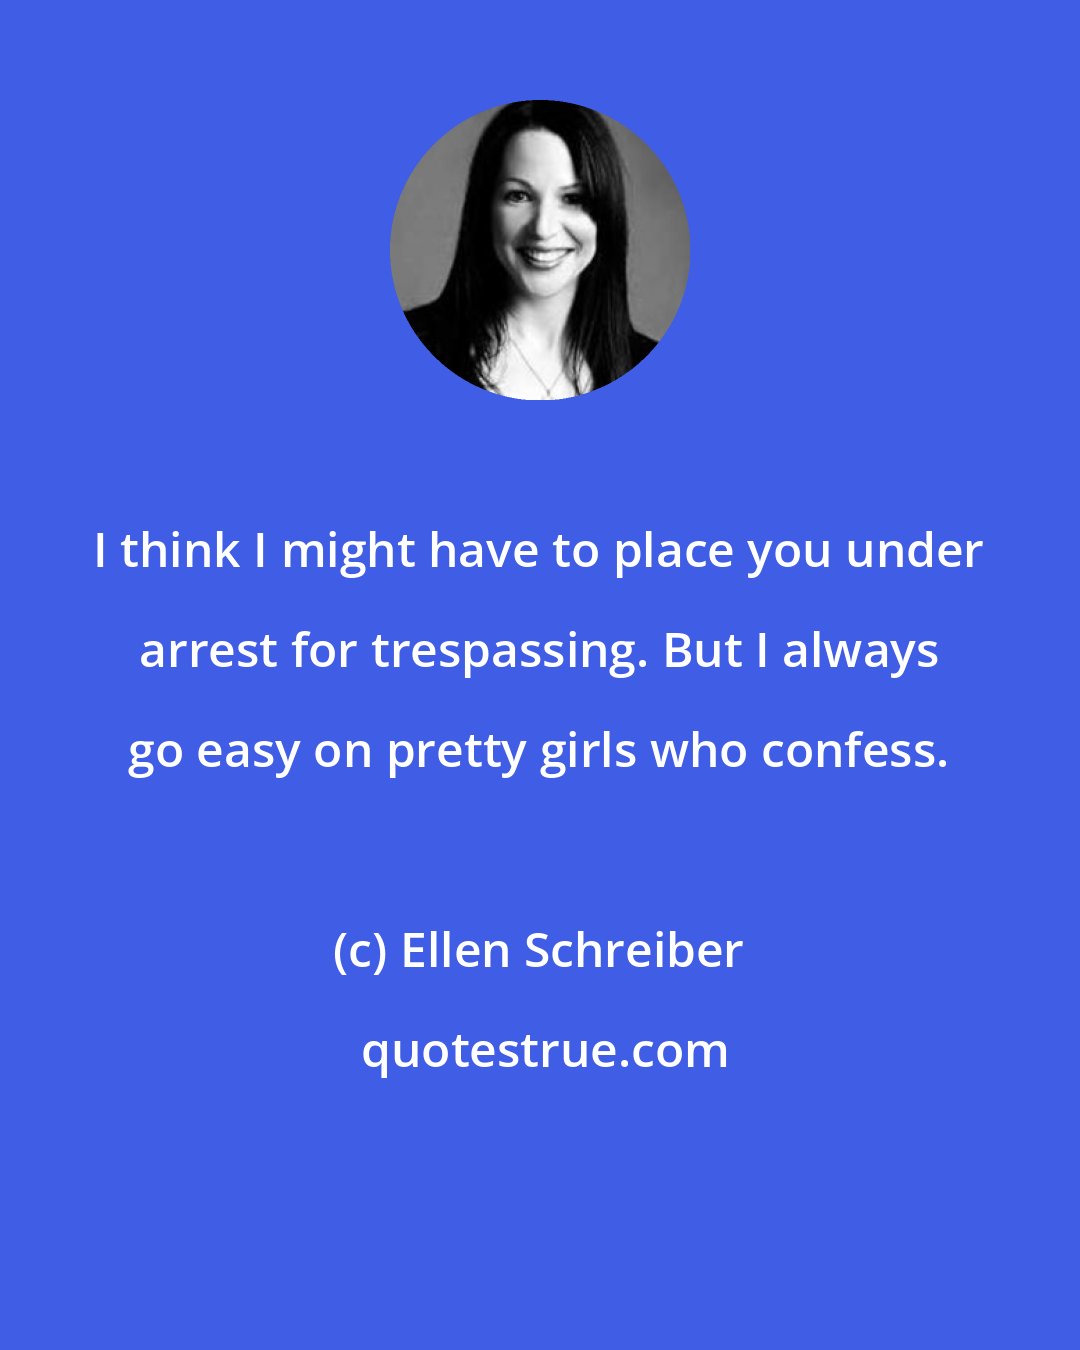 Ellen Schreiber: I think I might have to place you under arrest for trespassing. But I always go easy on pretty girls who confess.